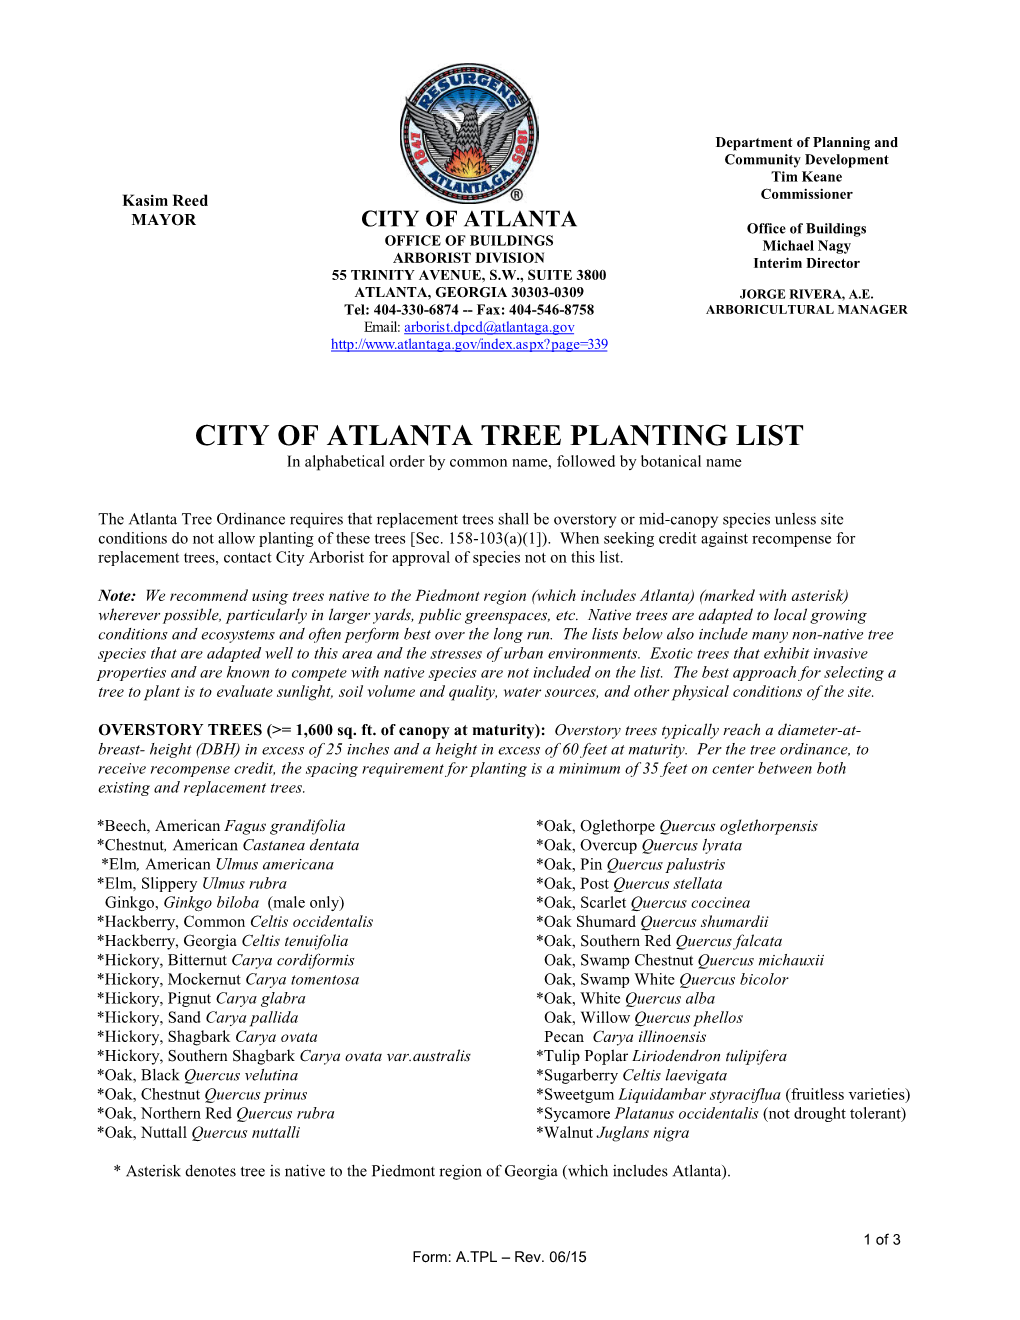 CITY of ATLANTA TREE PLANTING LIST in Alphabetical Order by Common Name, Followed by Botanical Name